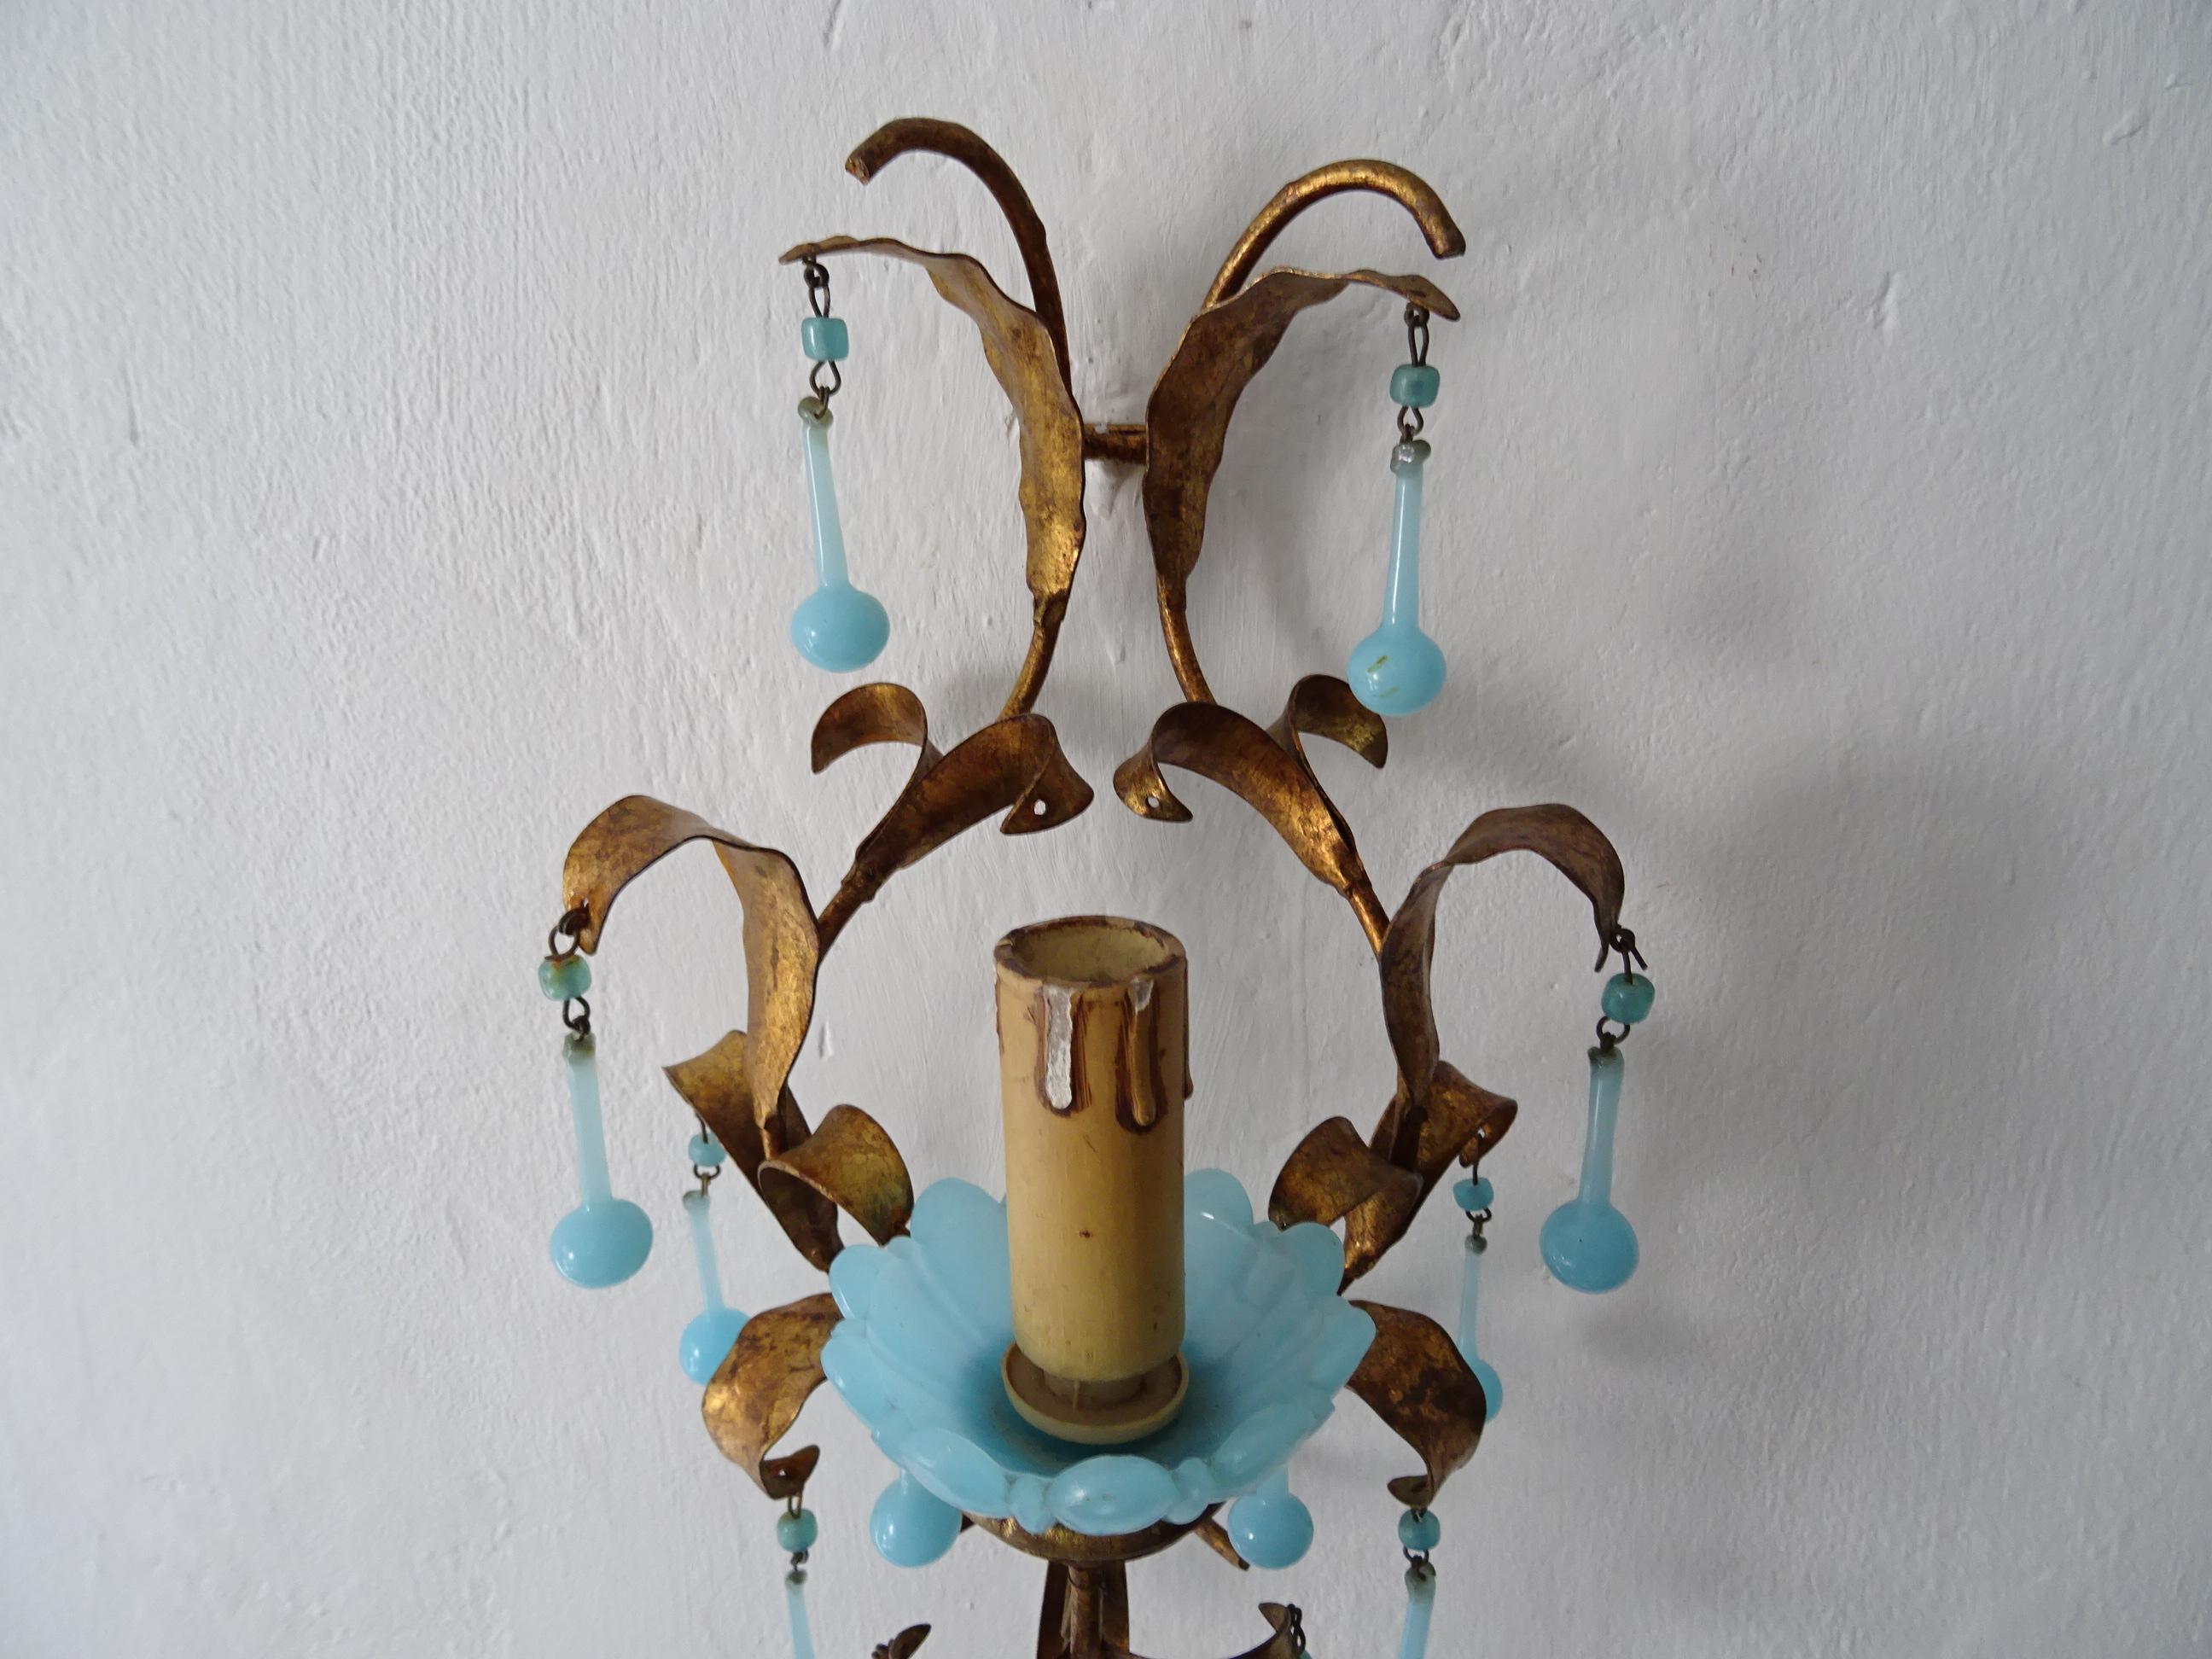 French Tole Aqua Blue Murano Opaline Drops & Beads Bobeches Sconces For Sale 3